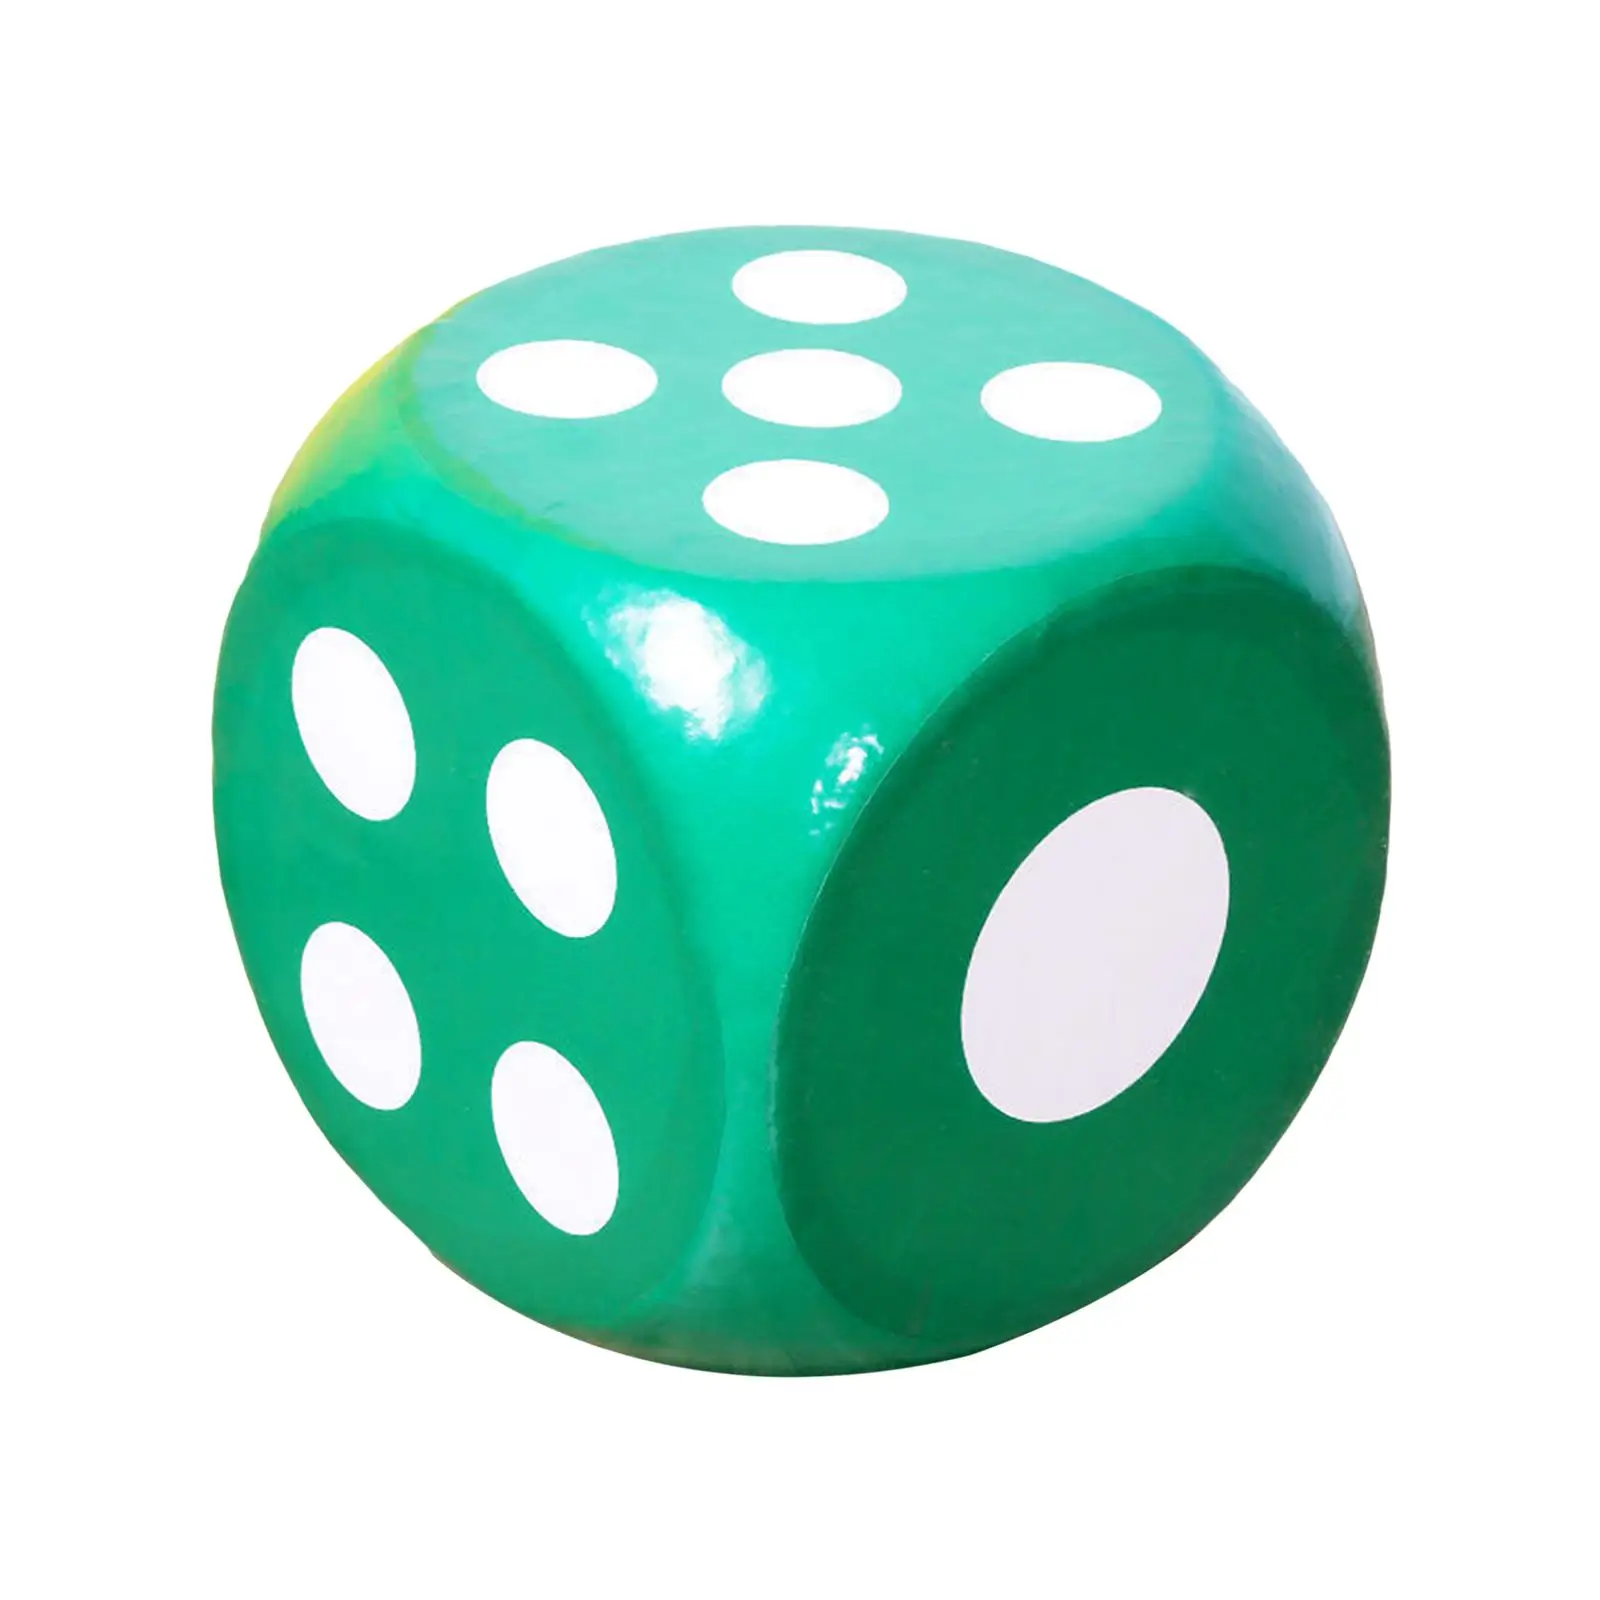 Soft Foam Jumbo Big Playing Dice Teaching Aids Learn Math Counting D6 12inch for Classroom Boys Girls Kids Children Party Favors